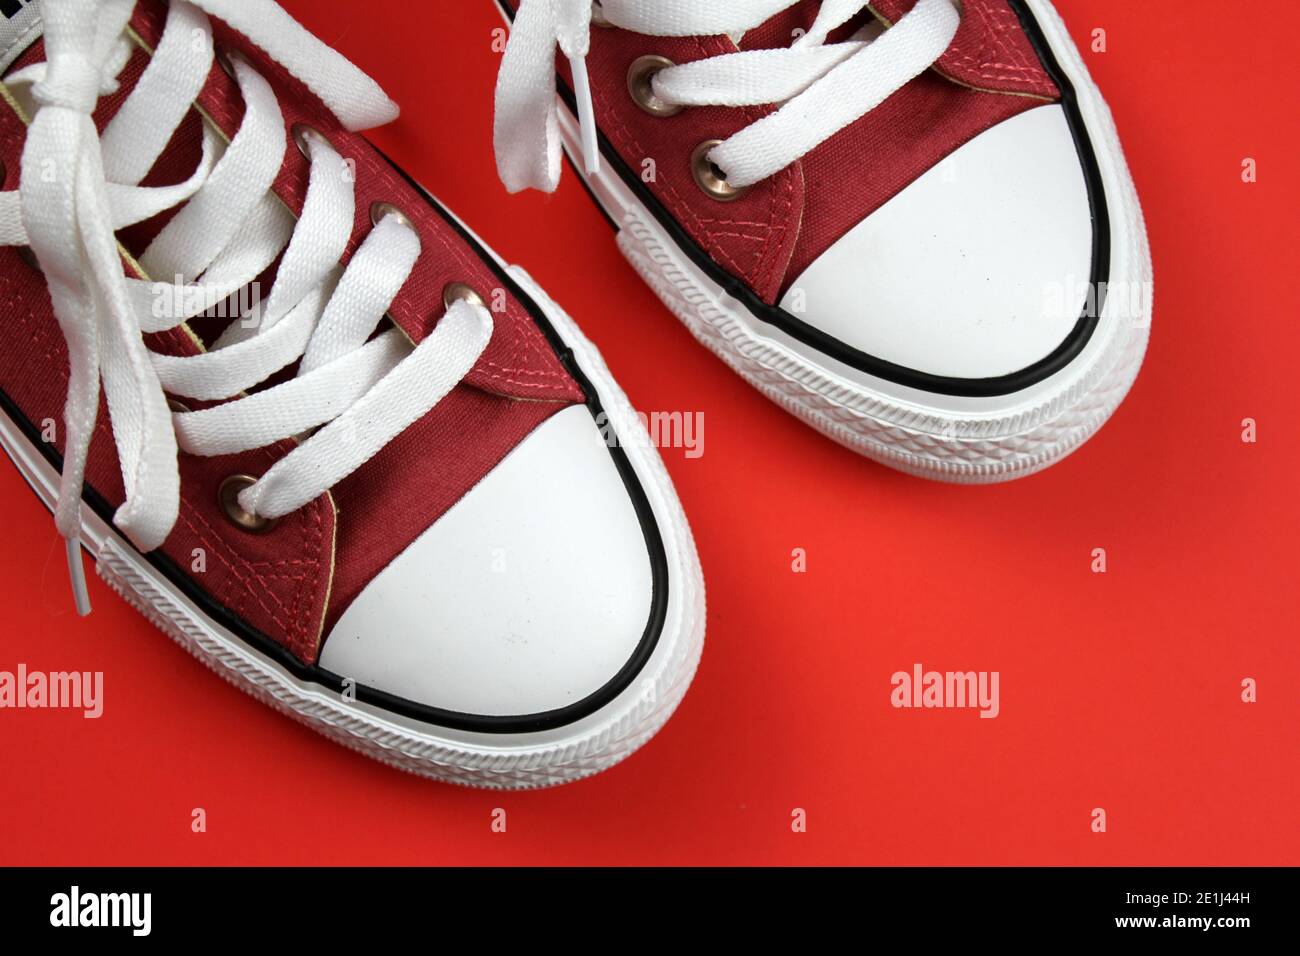 A pair of red pink sneakers with white laces against a stark red background. Stock Photo